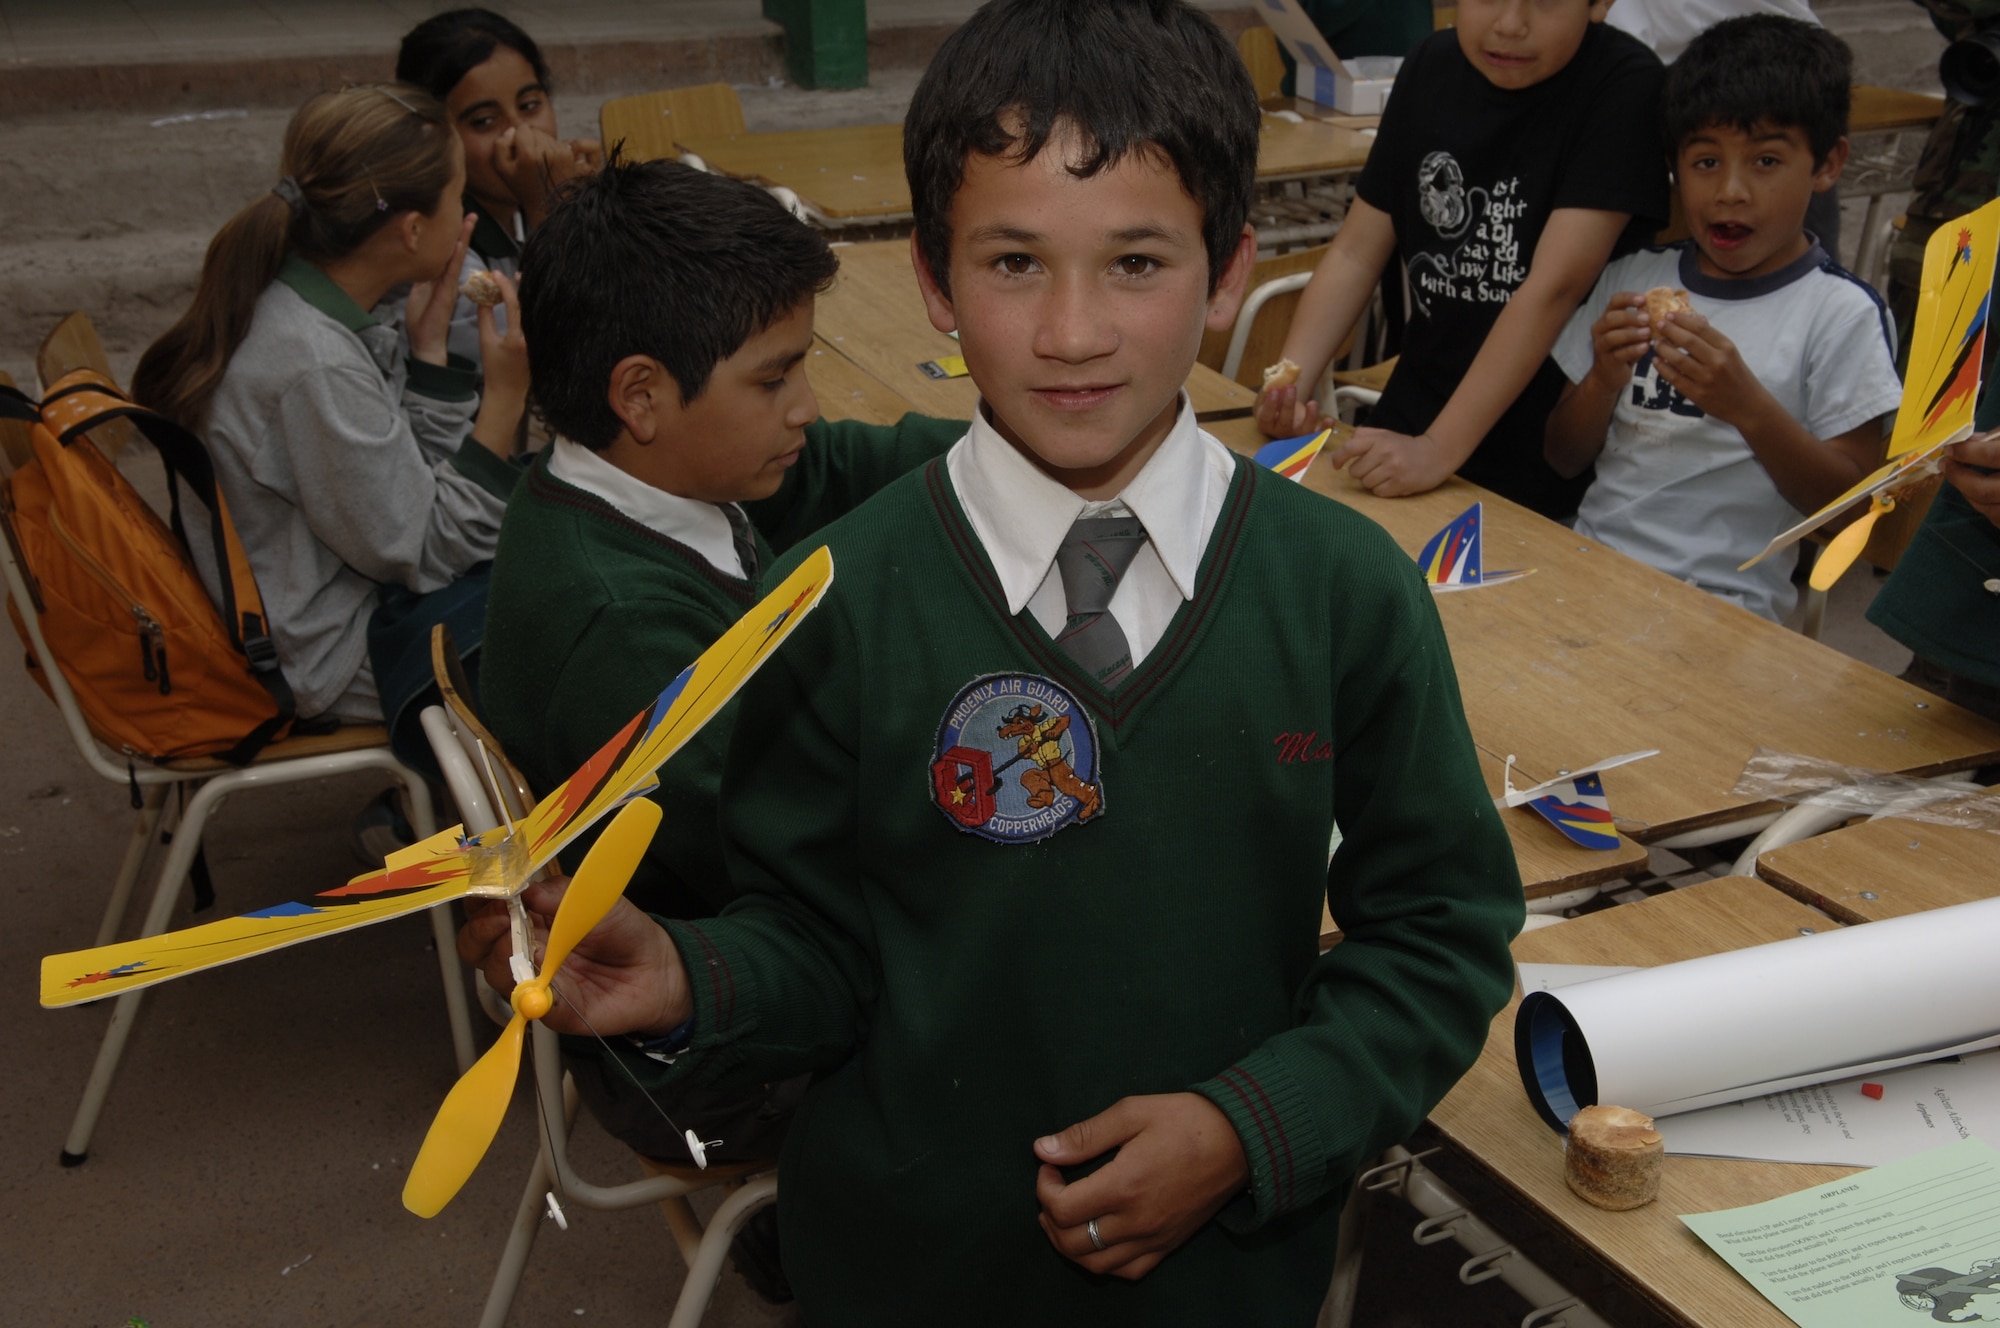 IQUIQUE, Chile -- A sixth-grade student of Colegio Macaya in Alto Hospicia, Chile, proudly displays his completed model airplane and a 161st Air Refueling Wing patch during a joint U.S.-Fuerza Aerea de Chile visit to the school Oct 27.  (U.S. Air Force photo by Tech. Sgt. Eric Petosky)